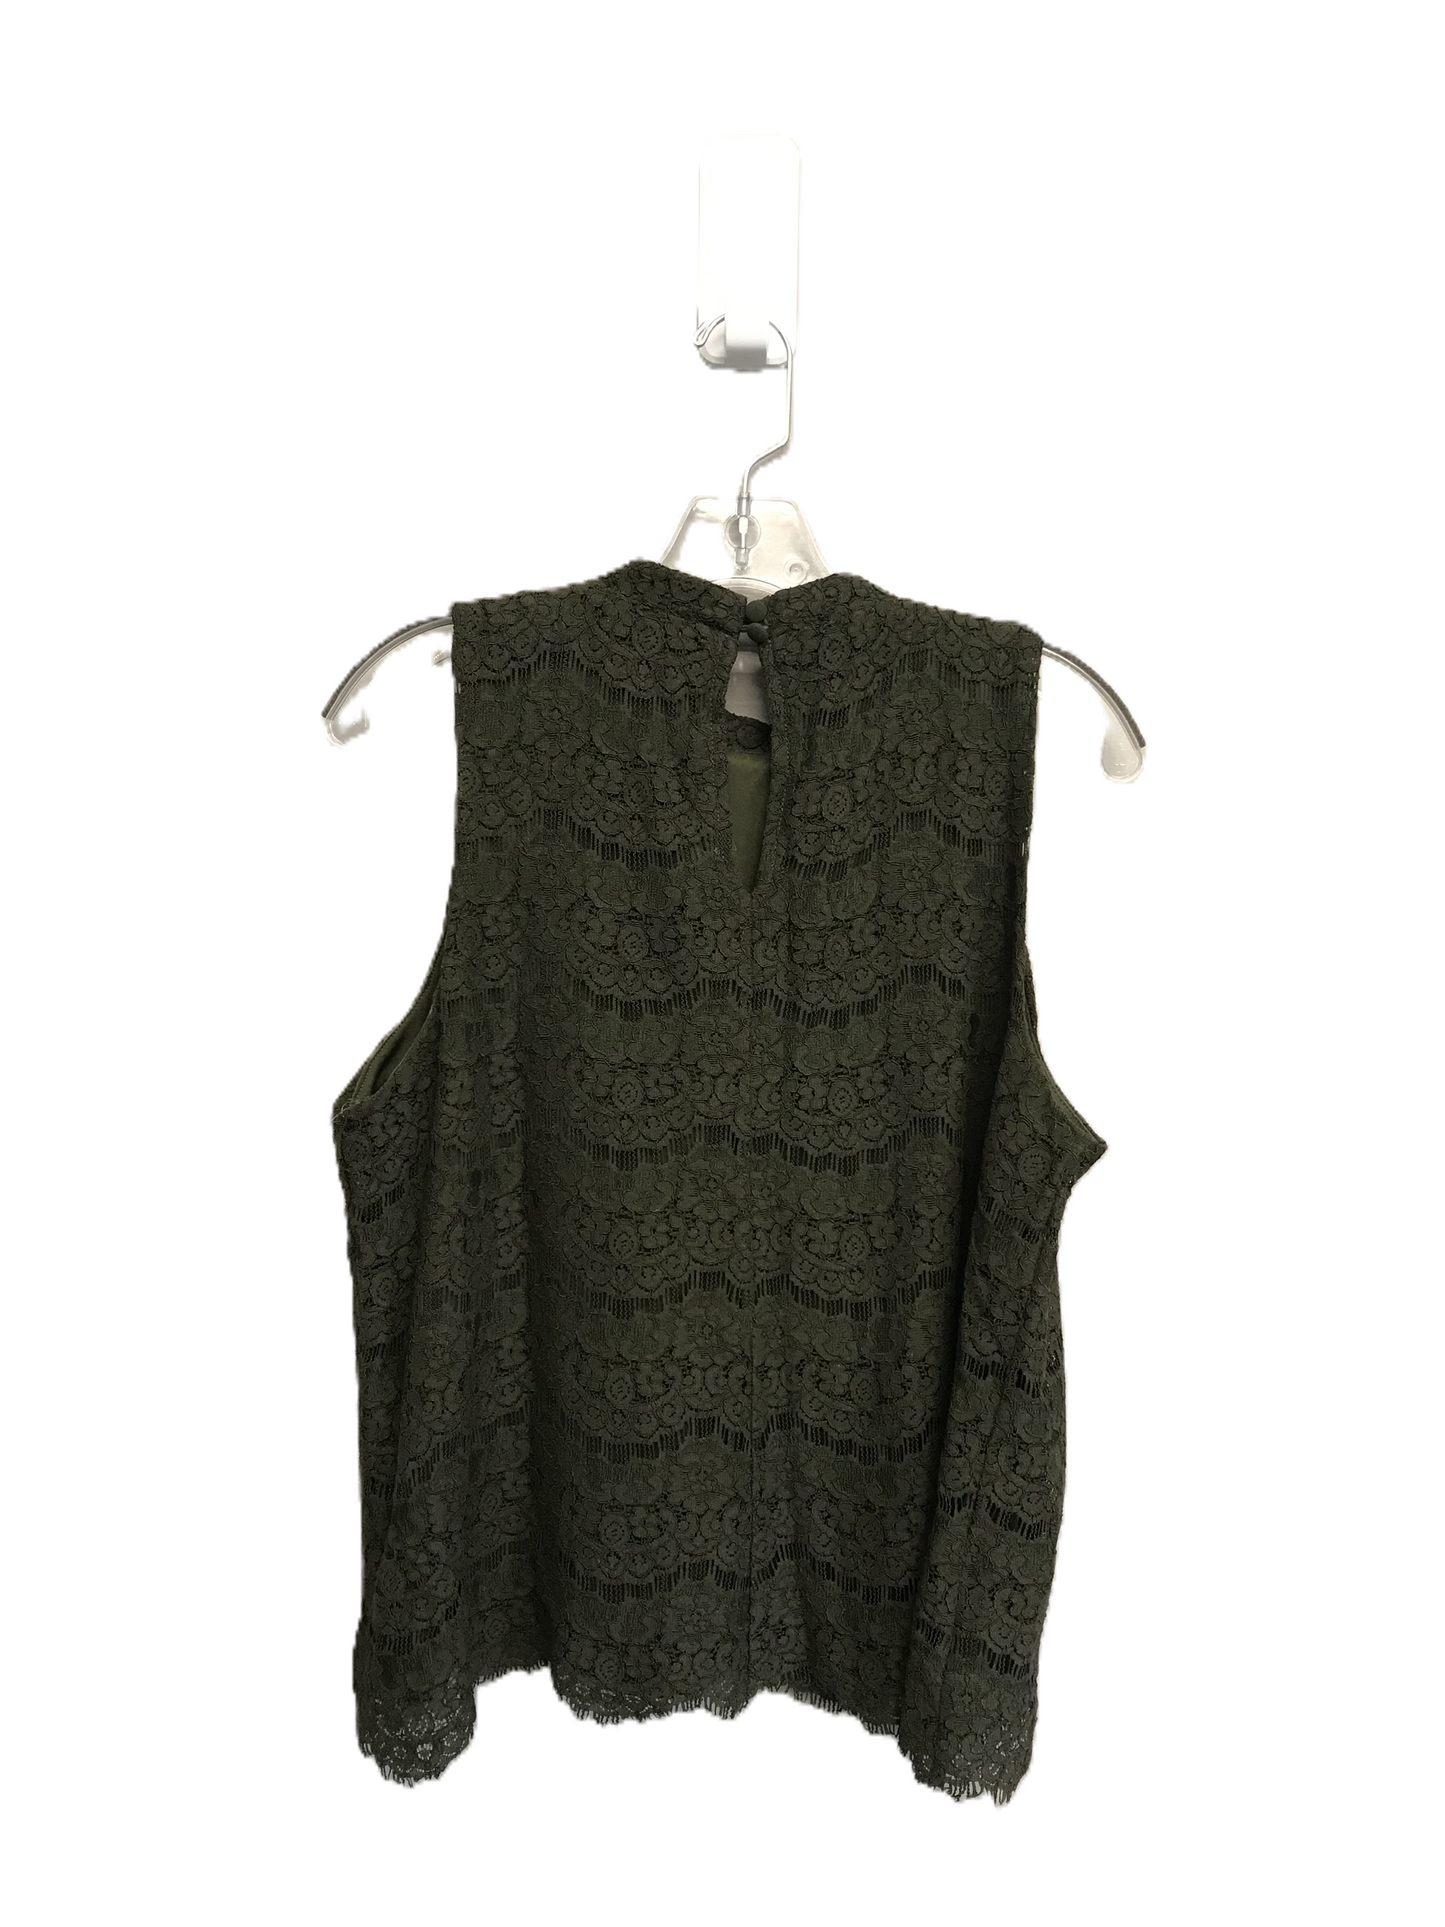 Green Top Sleeveless By New York And Co, Size: L